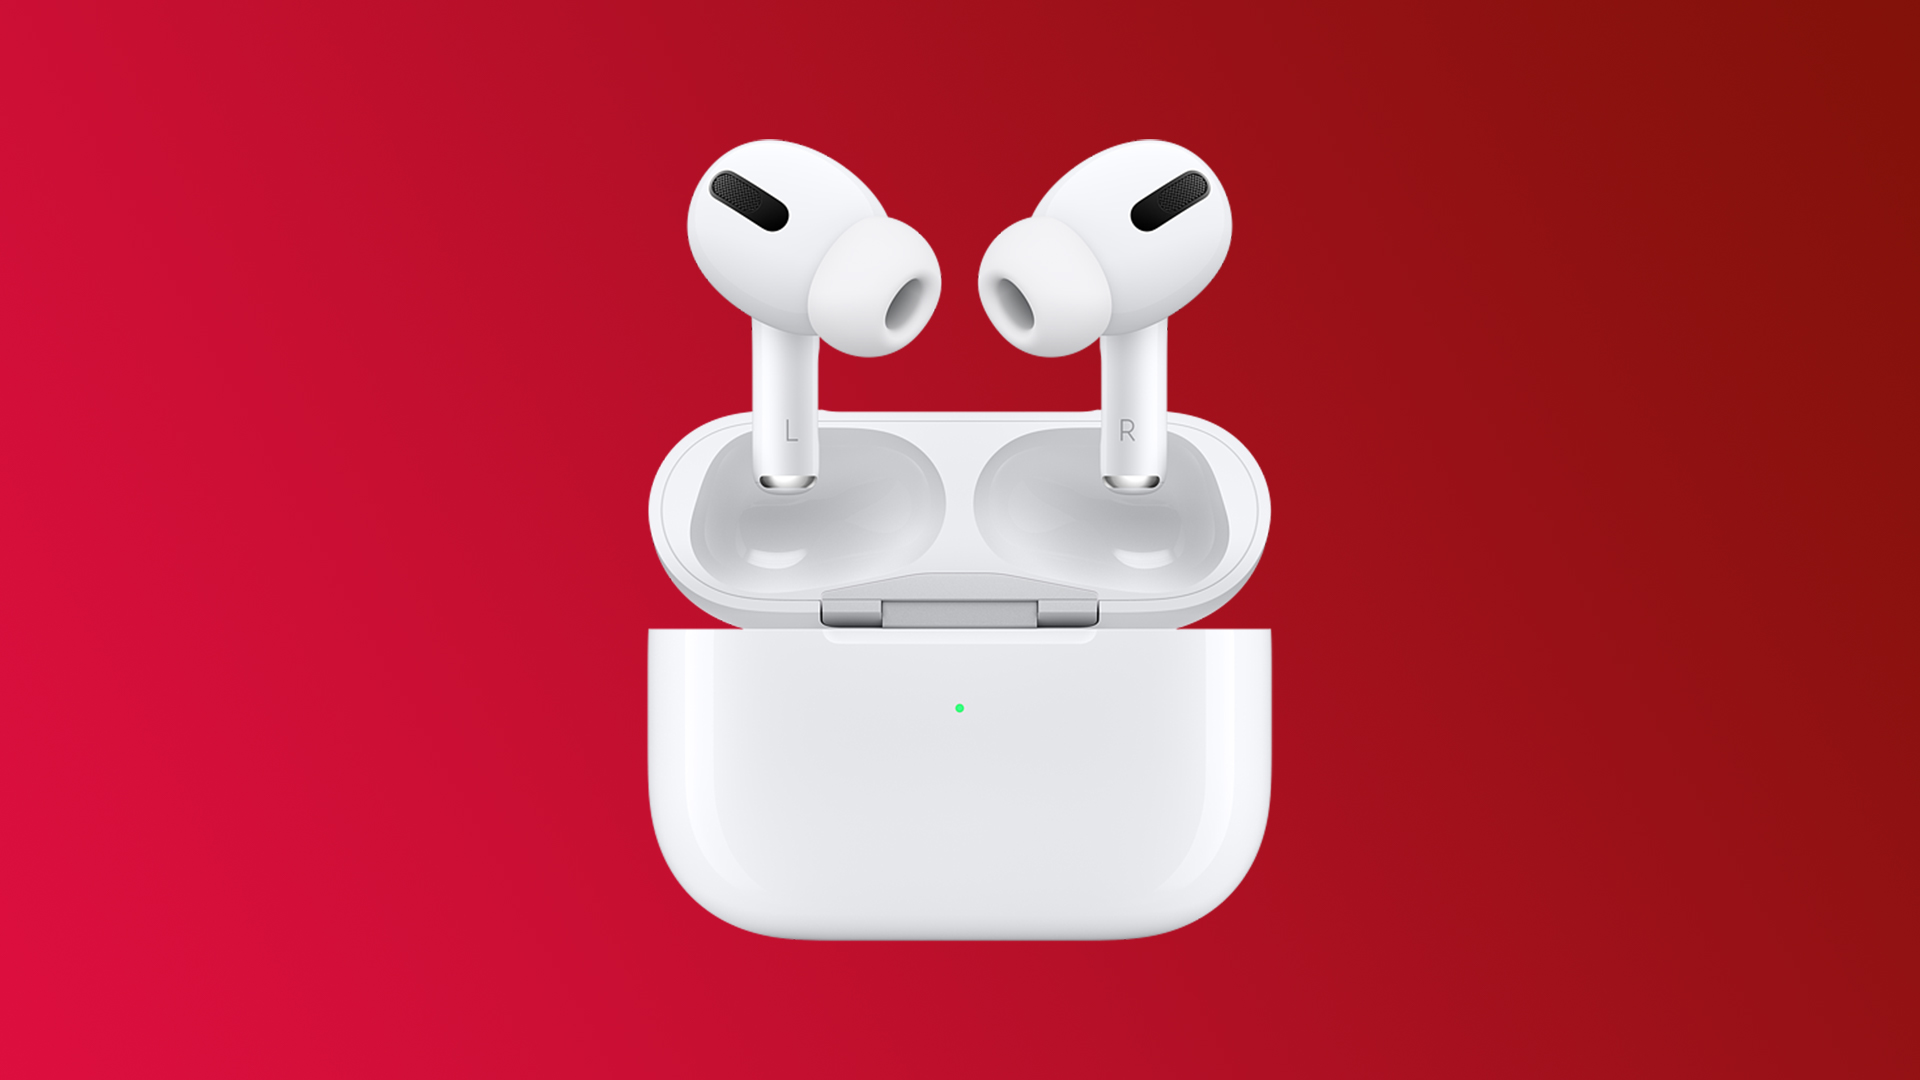 Air pods Pro 2